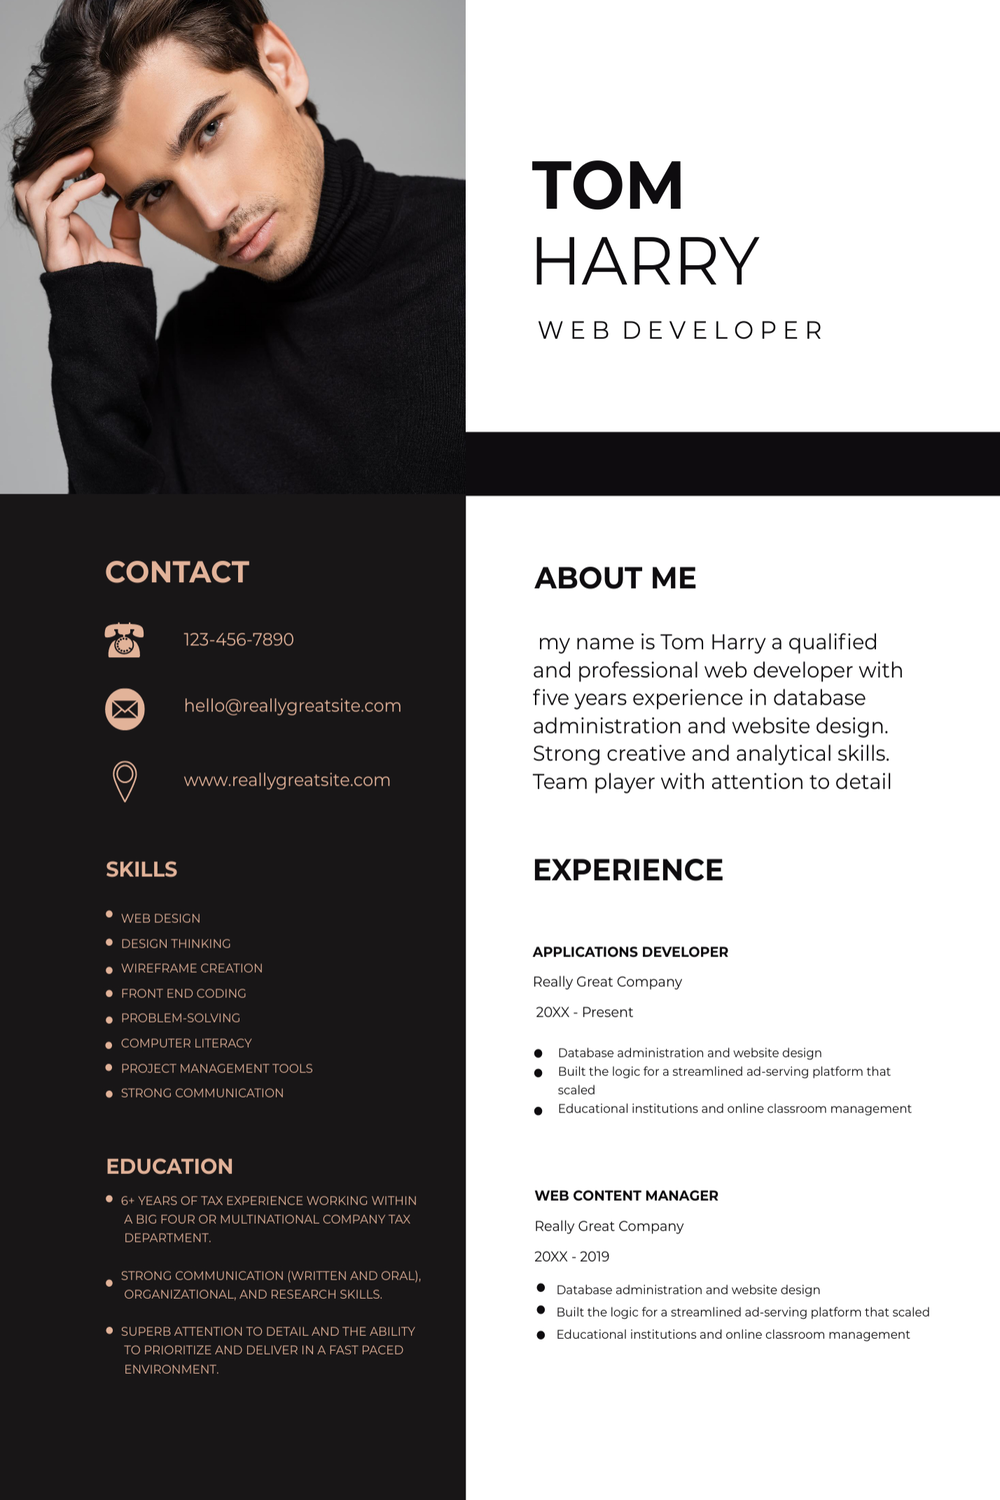 Black and white resume with a black background.